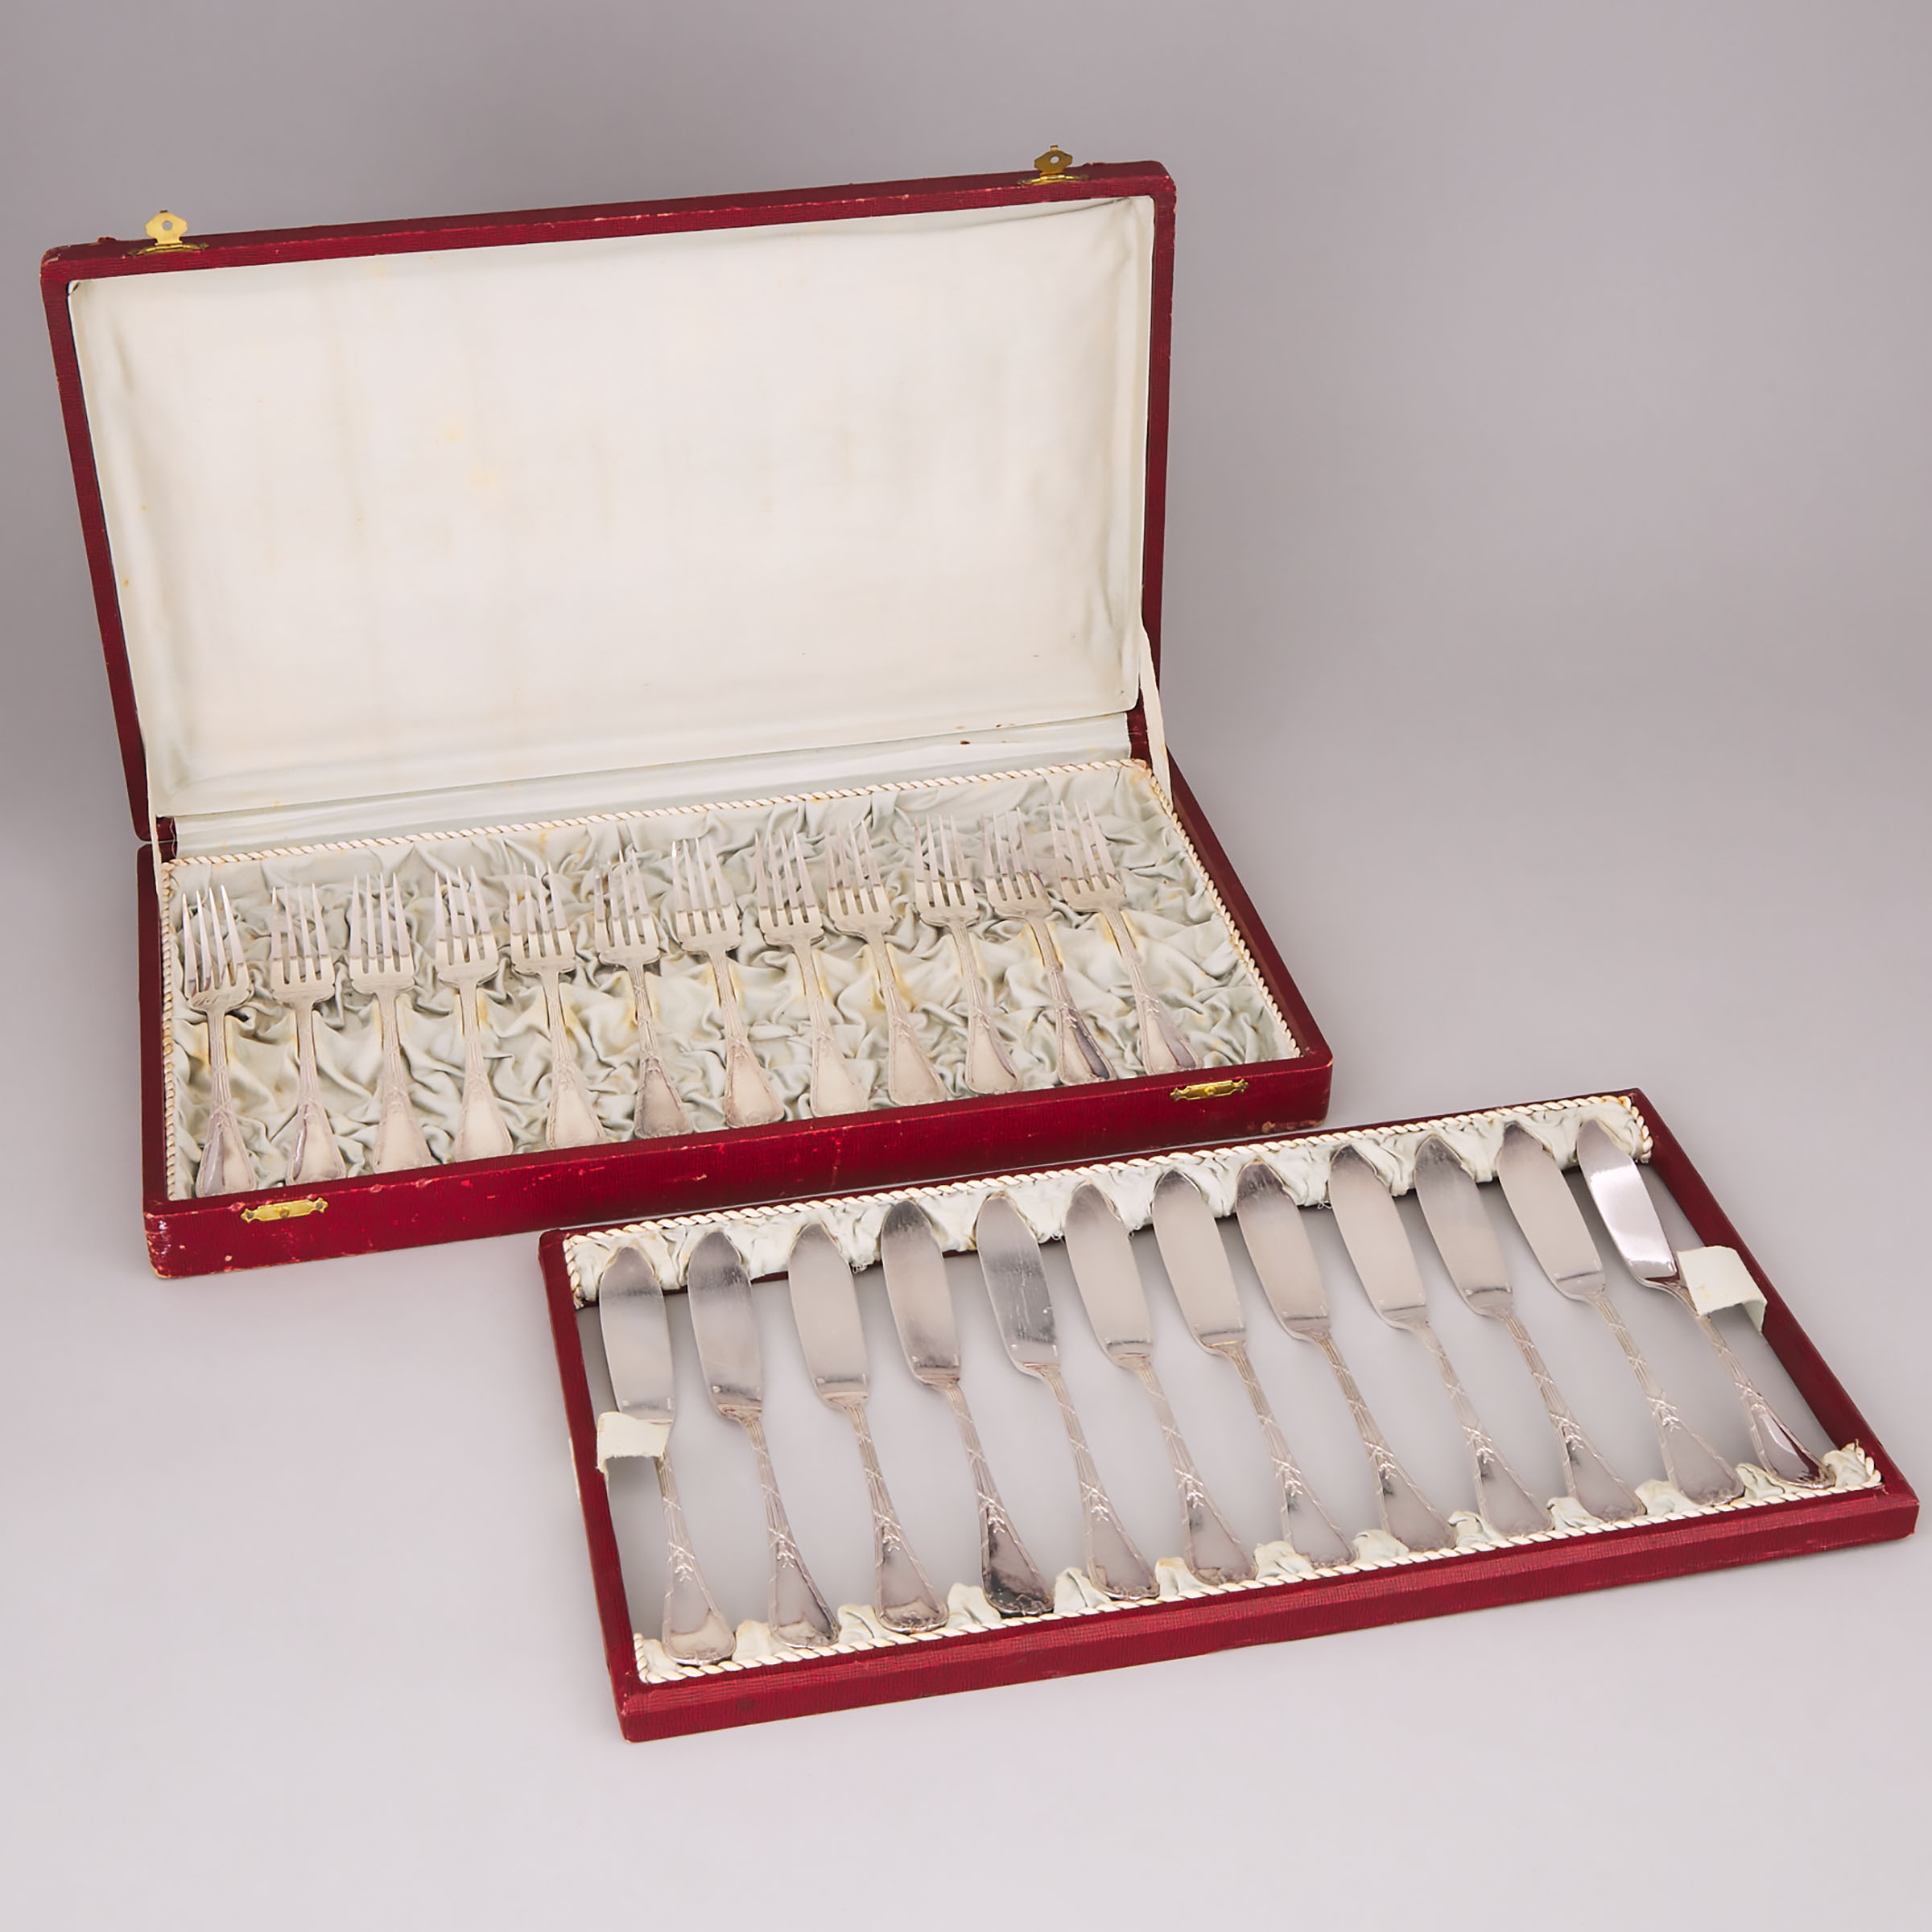 French Silver Plated Fish Flatware Service, Christofle, 20th century